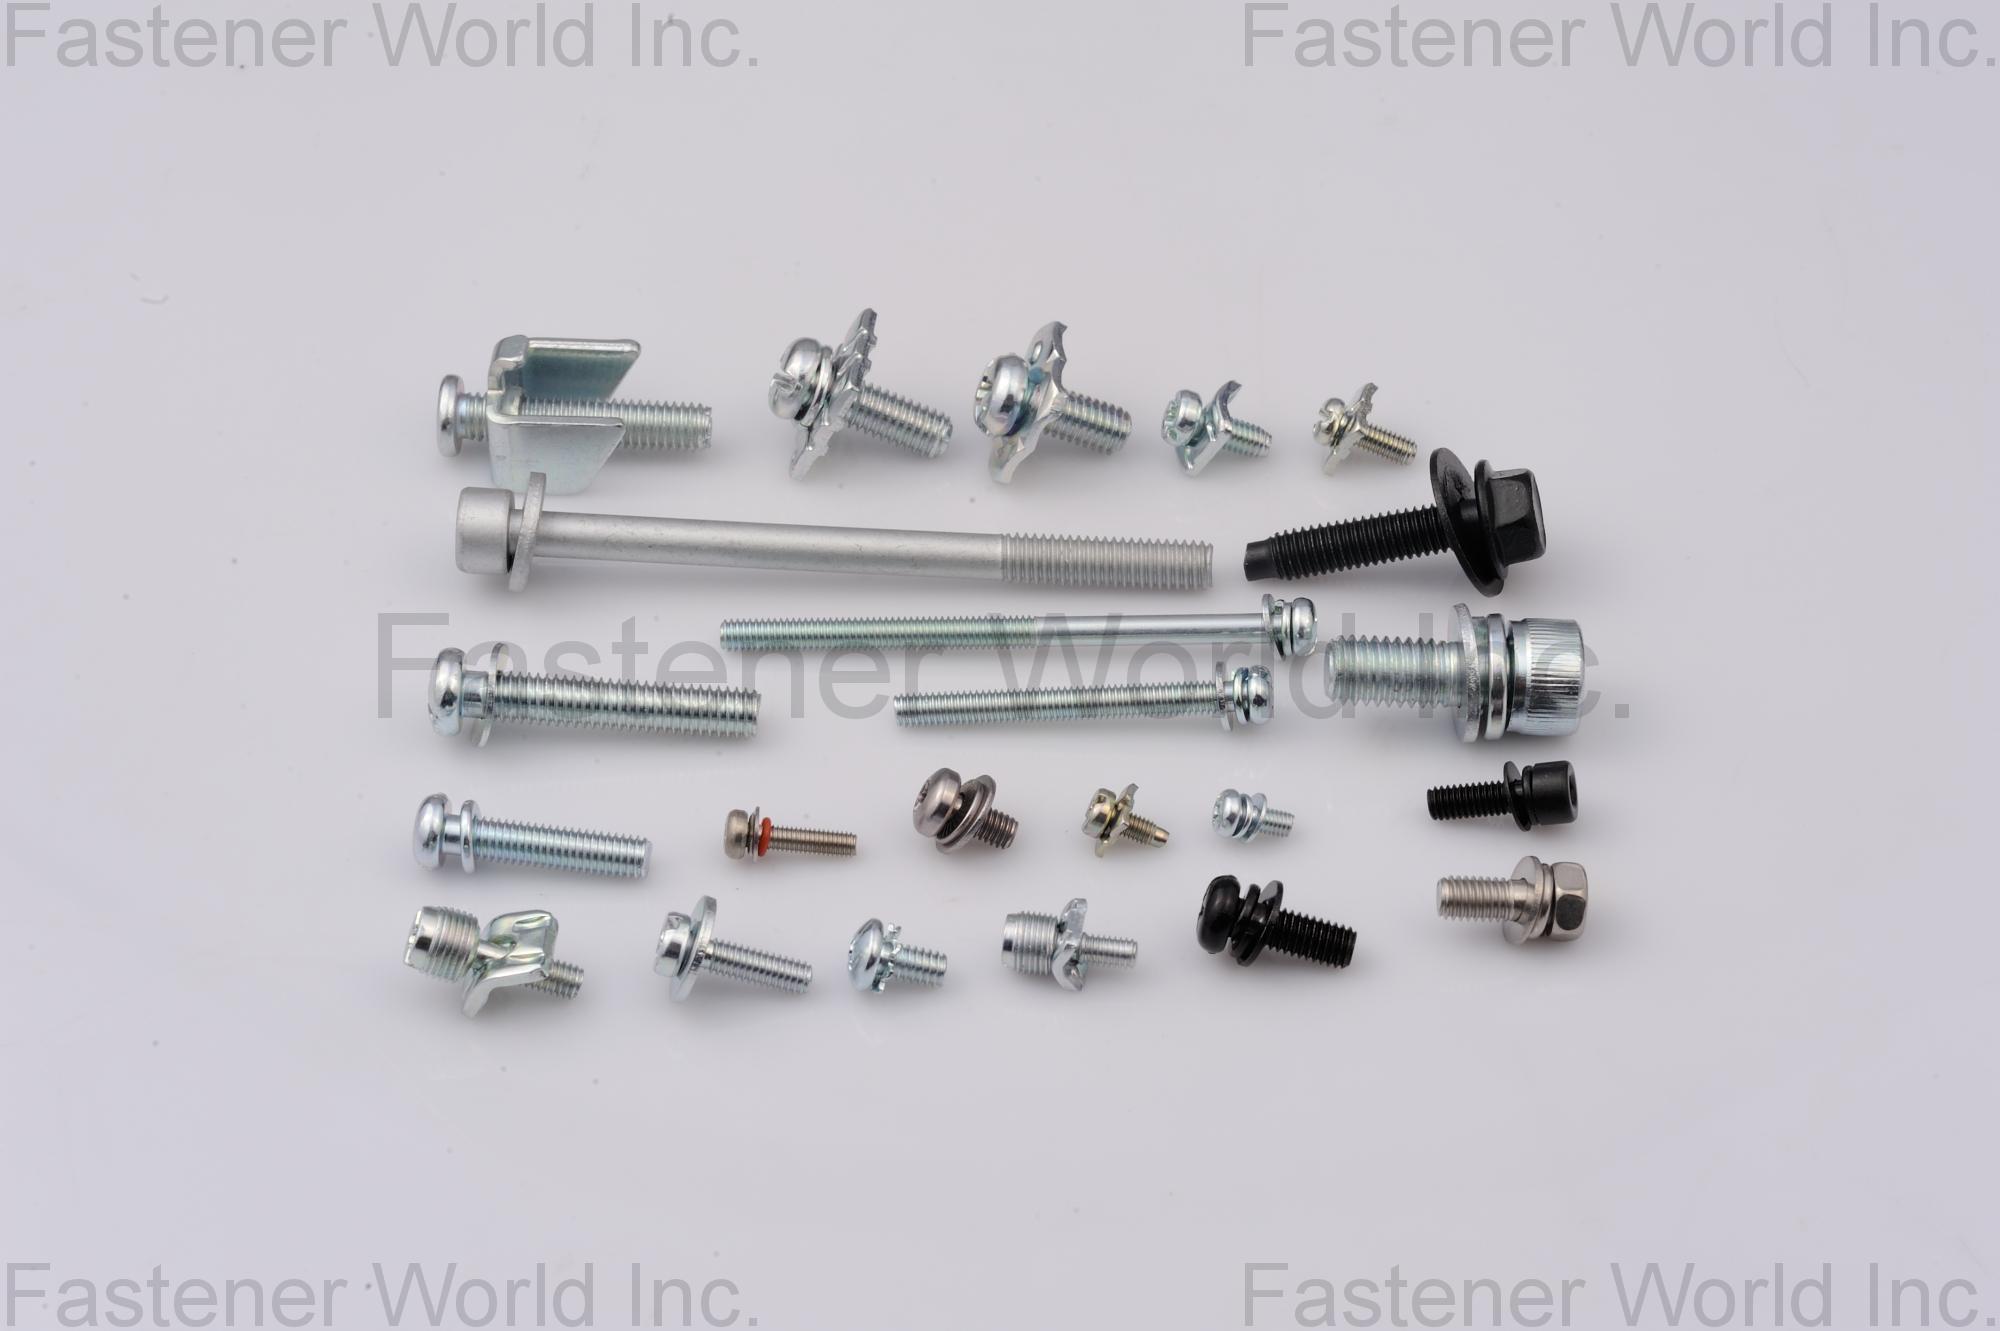 SEMS Screws Screw and Washer Assembly